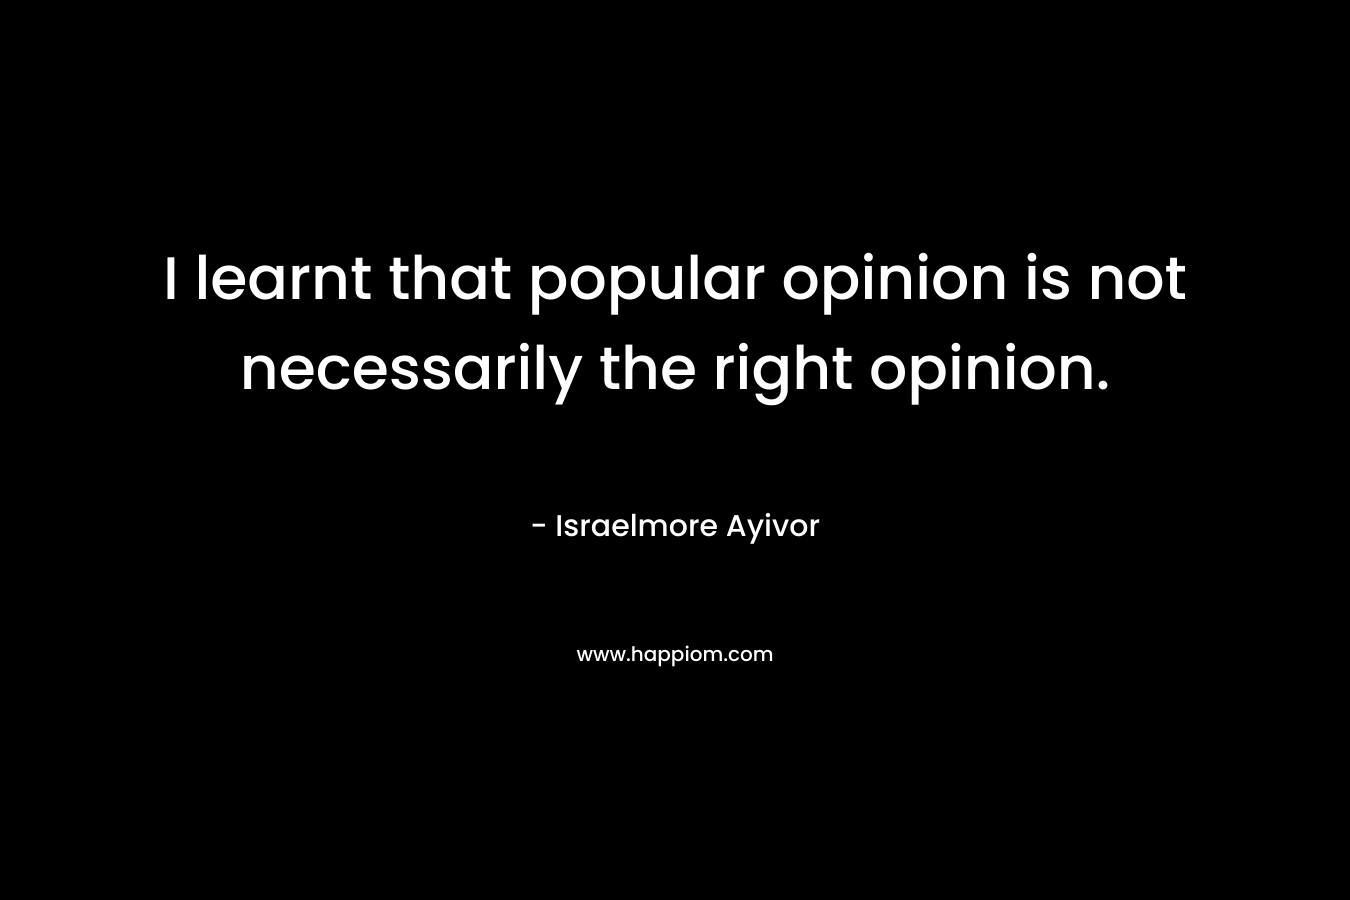 I learnt that popular opinion is not necessarily the right opinion.